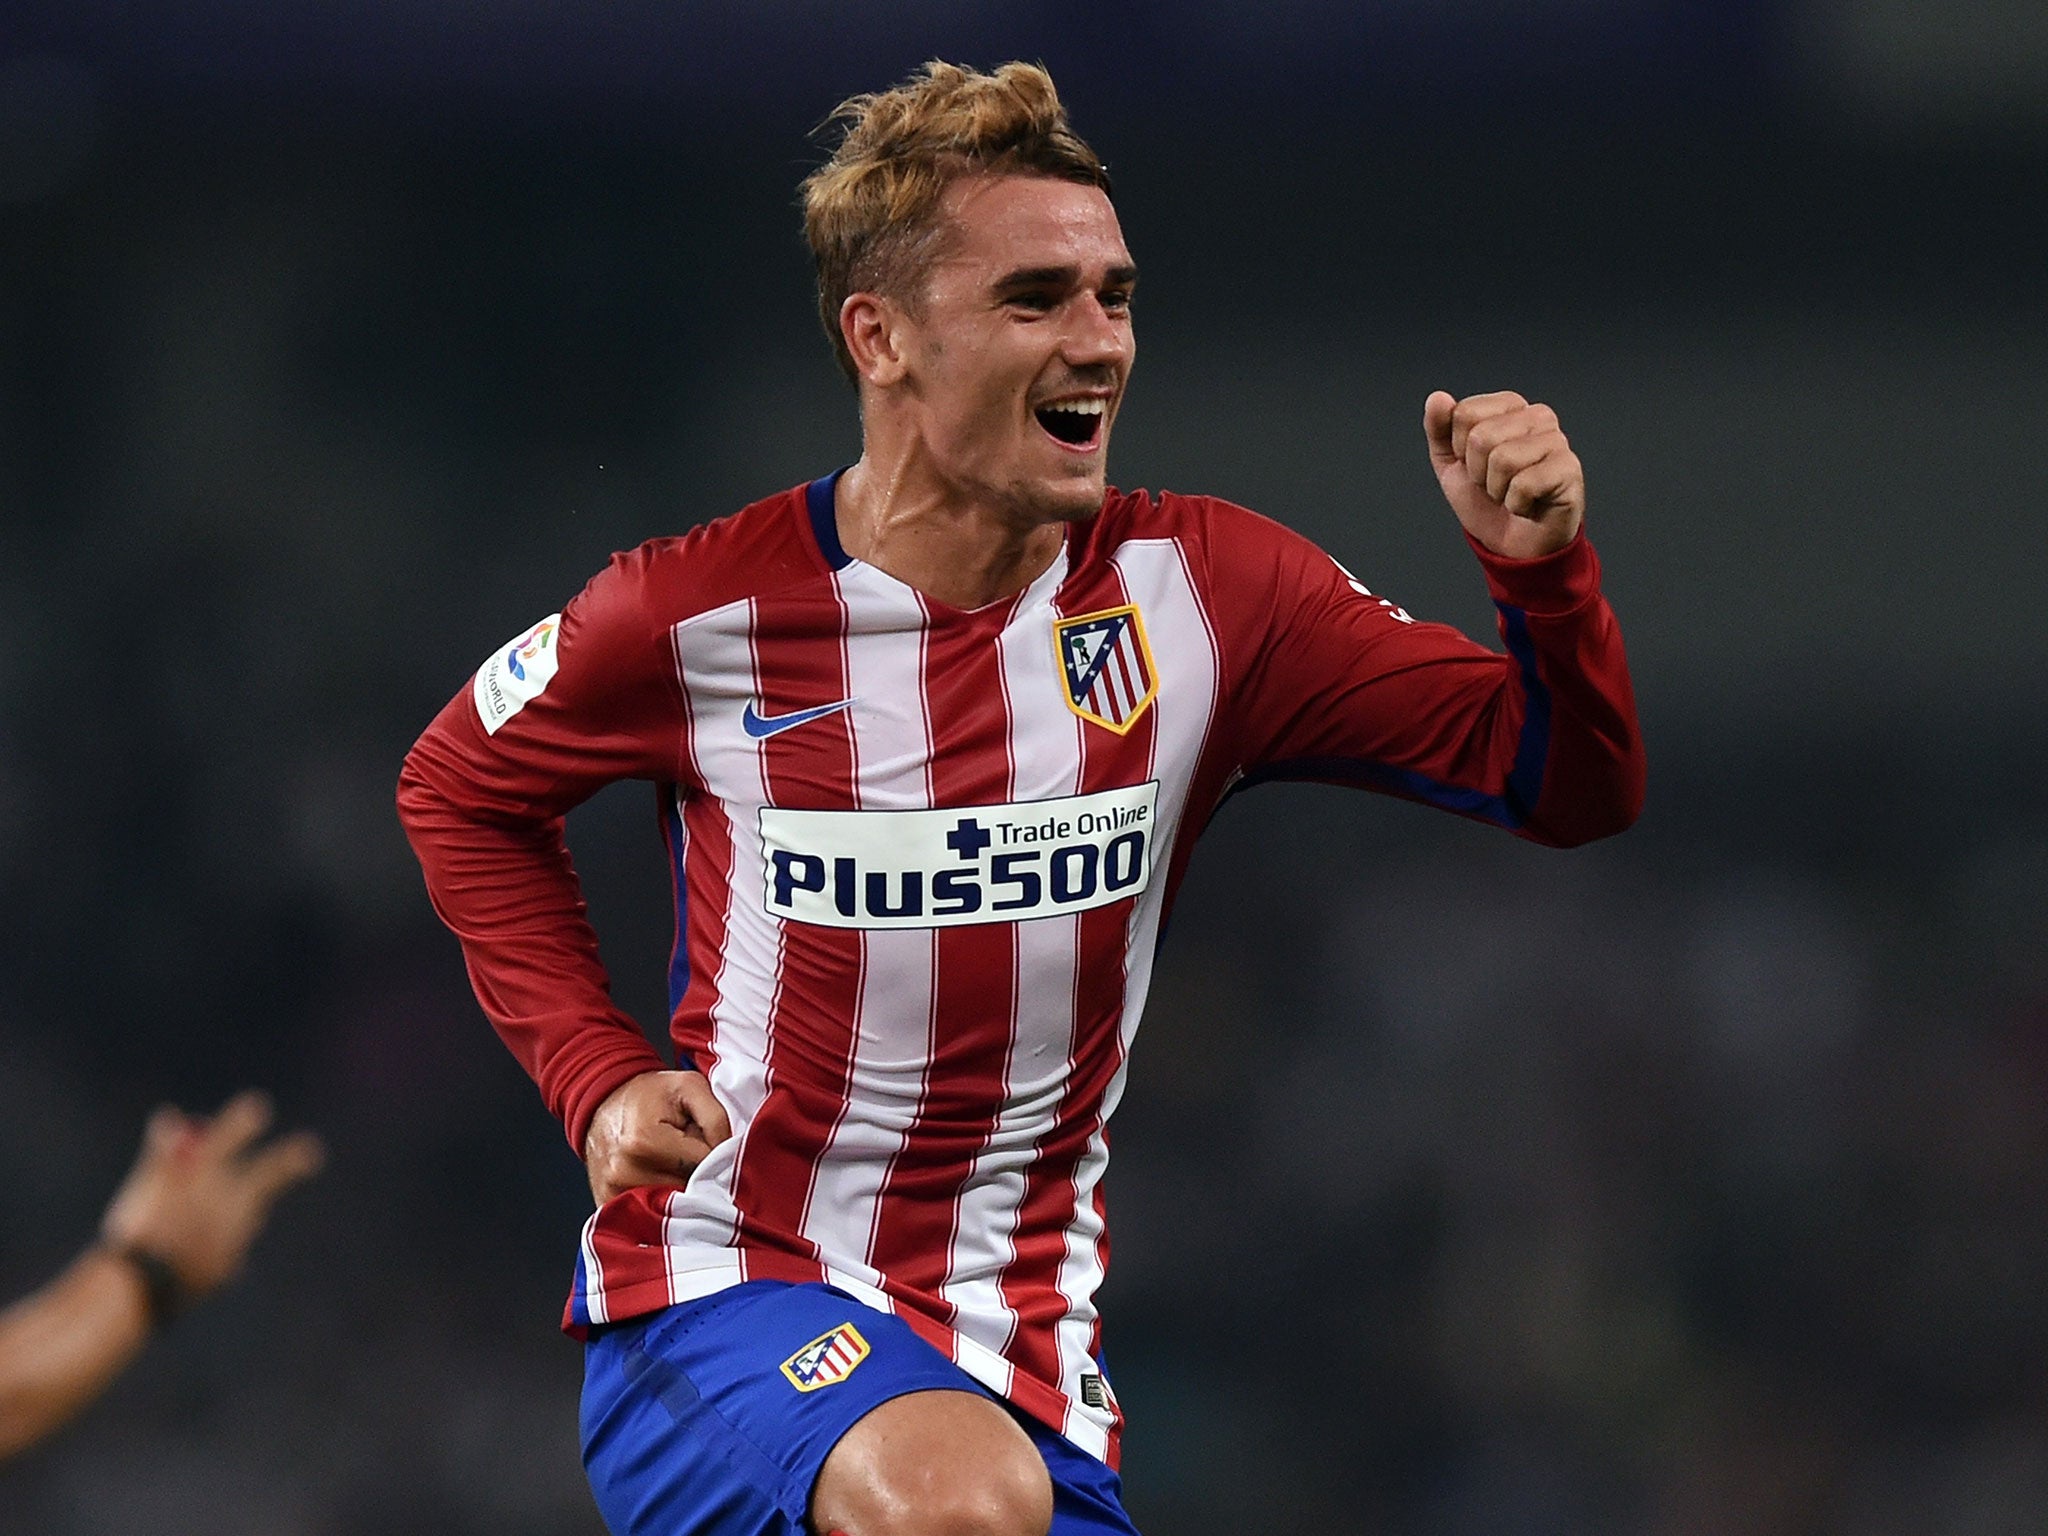 Atletico Madrid forward Antoine Griezmann has been linked with Manchester United